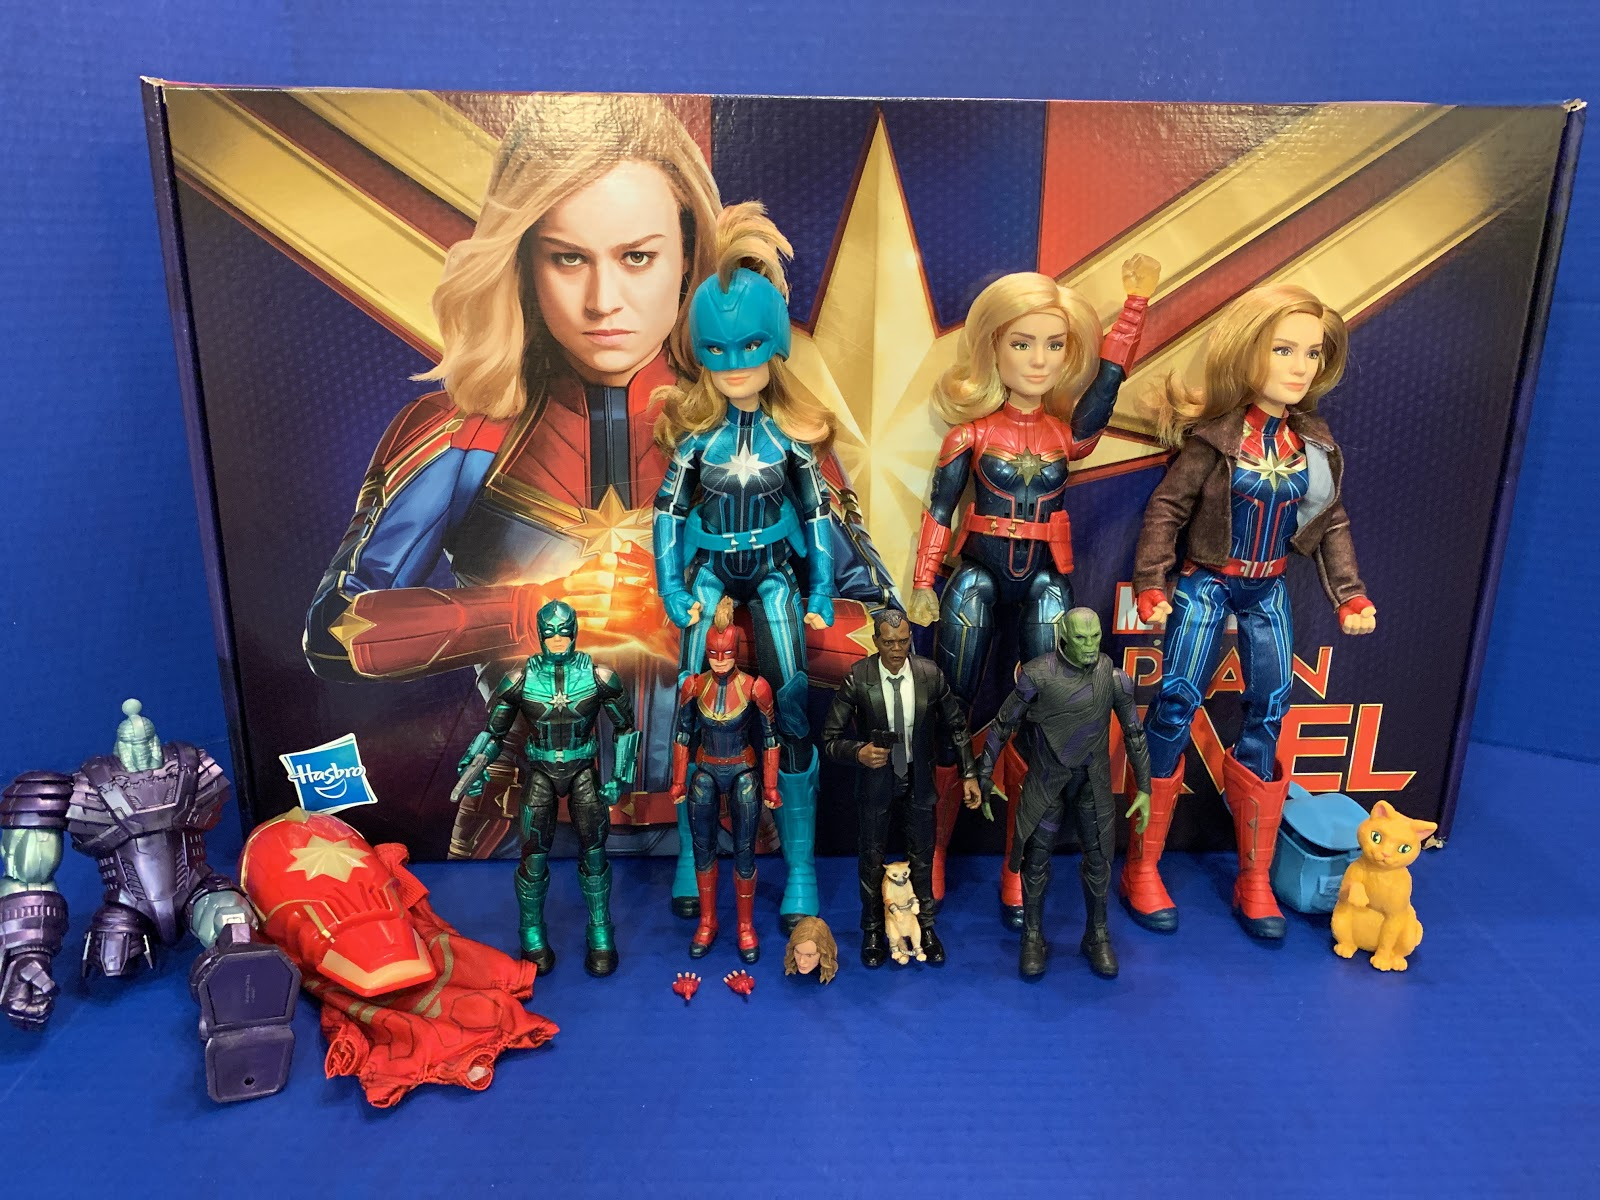 Toy Review "Captain Marvel" by Hasbro (Marvel Legends and